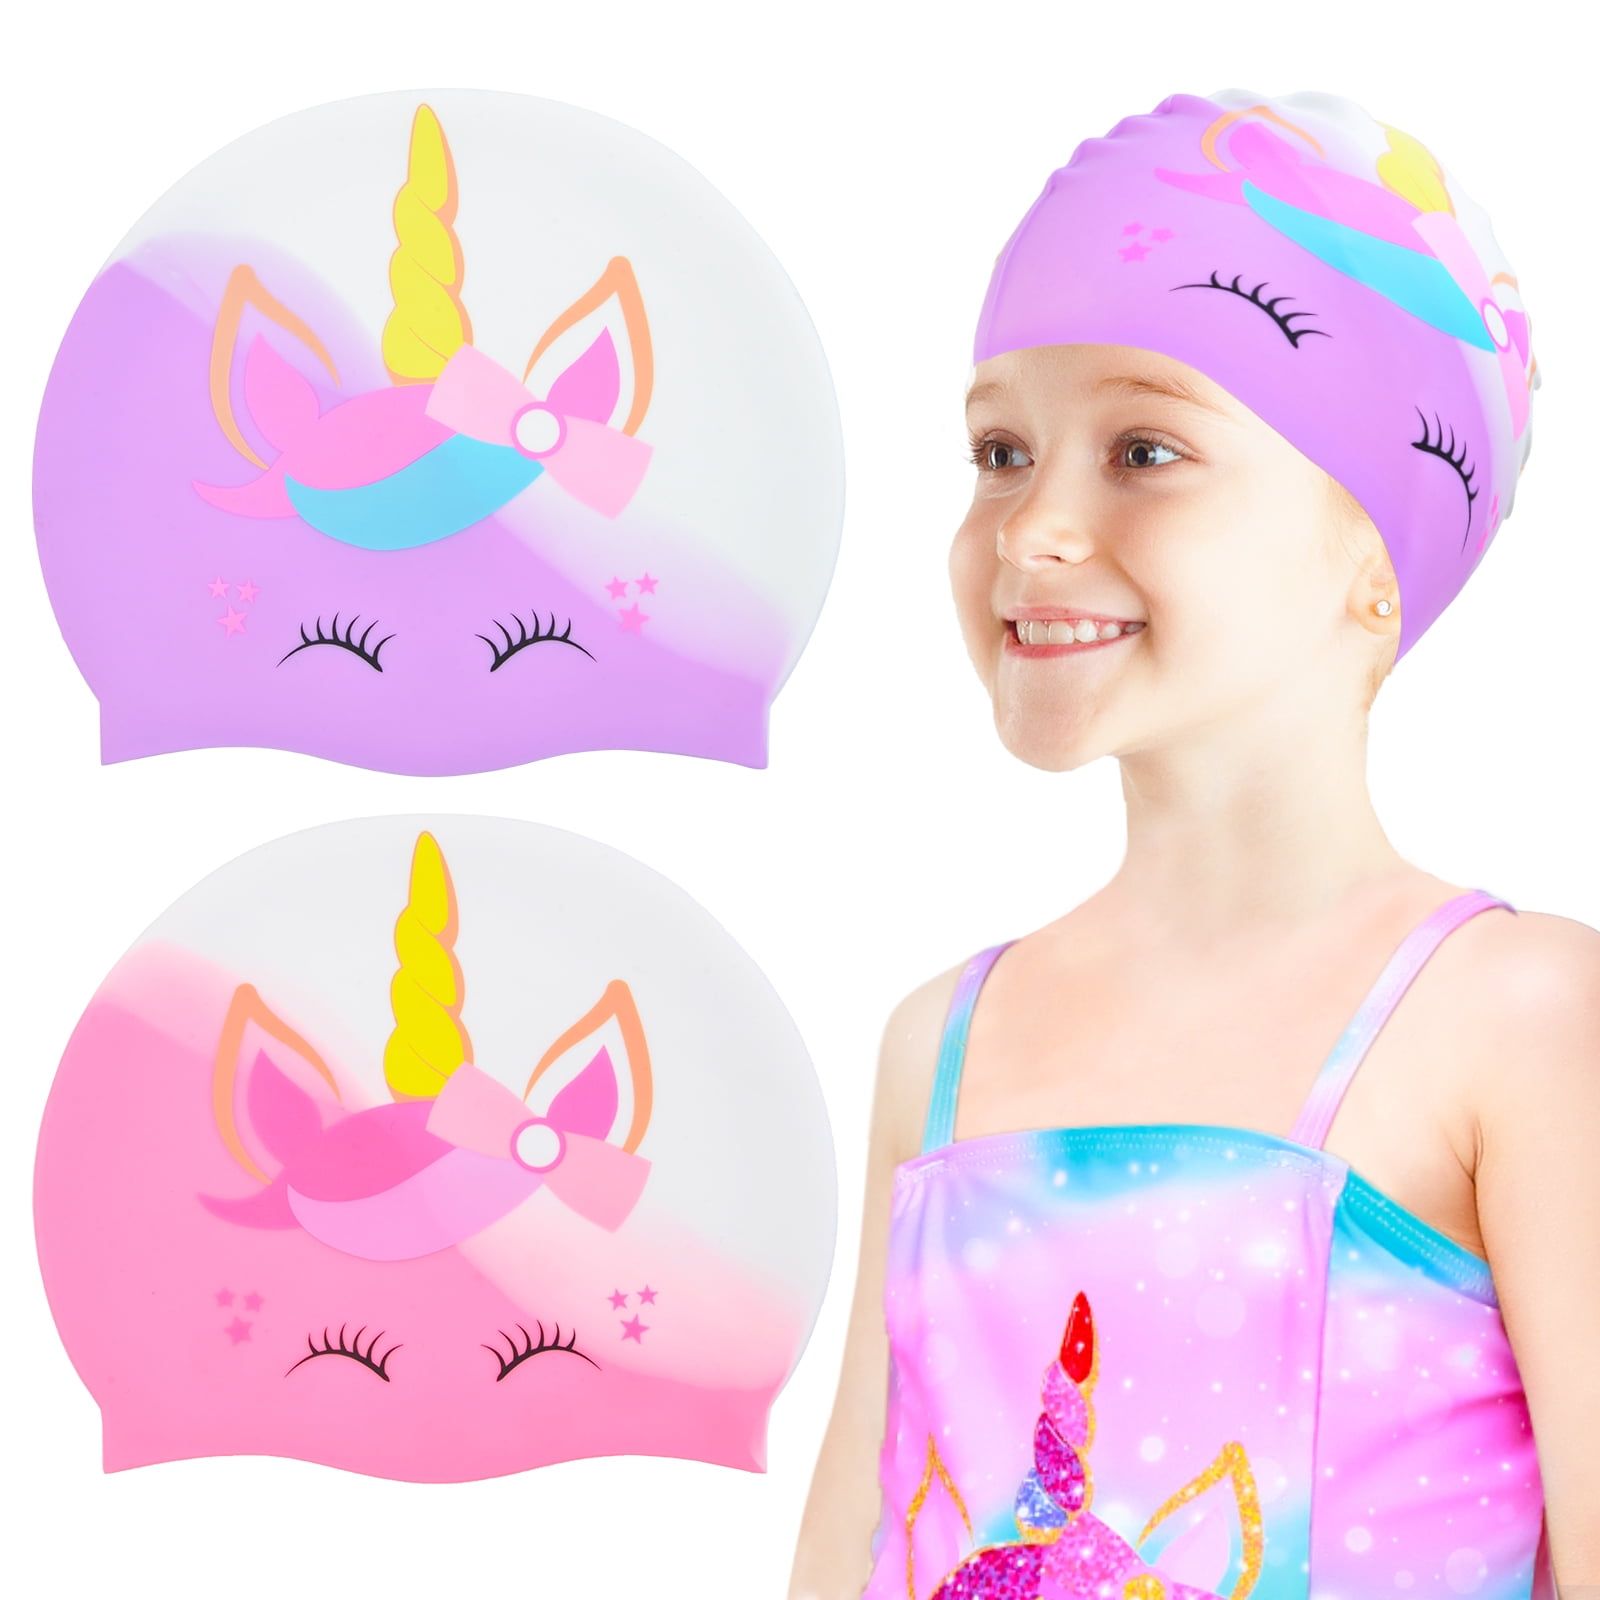 Age 4-8 PASHOP 2 Pack Swim Cap for Kids Waterproof Silicone Swimming Caps for Girls Boys Unicorn Dinosaur Toddler Kids Swimming Hat for Long and Short Hair 